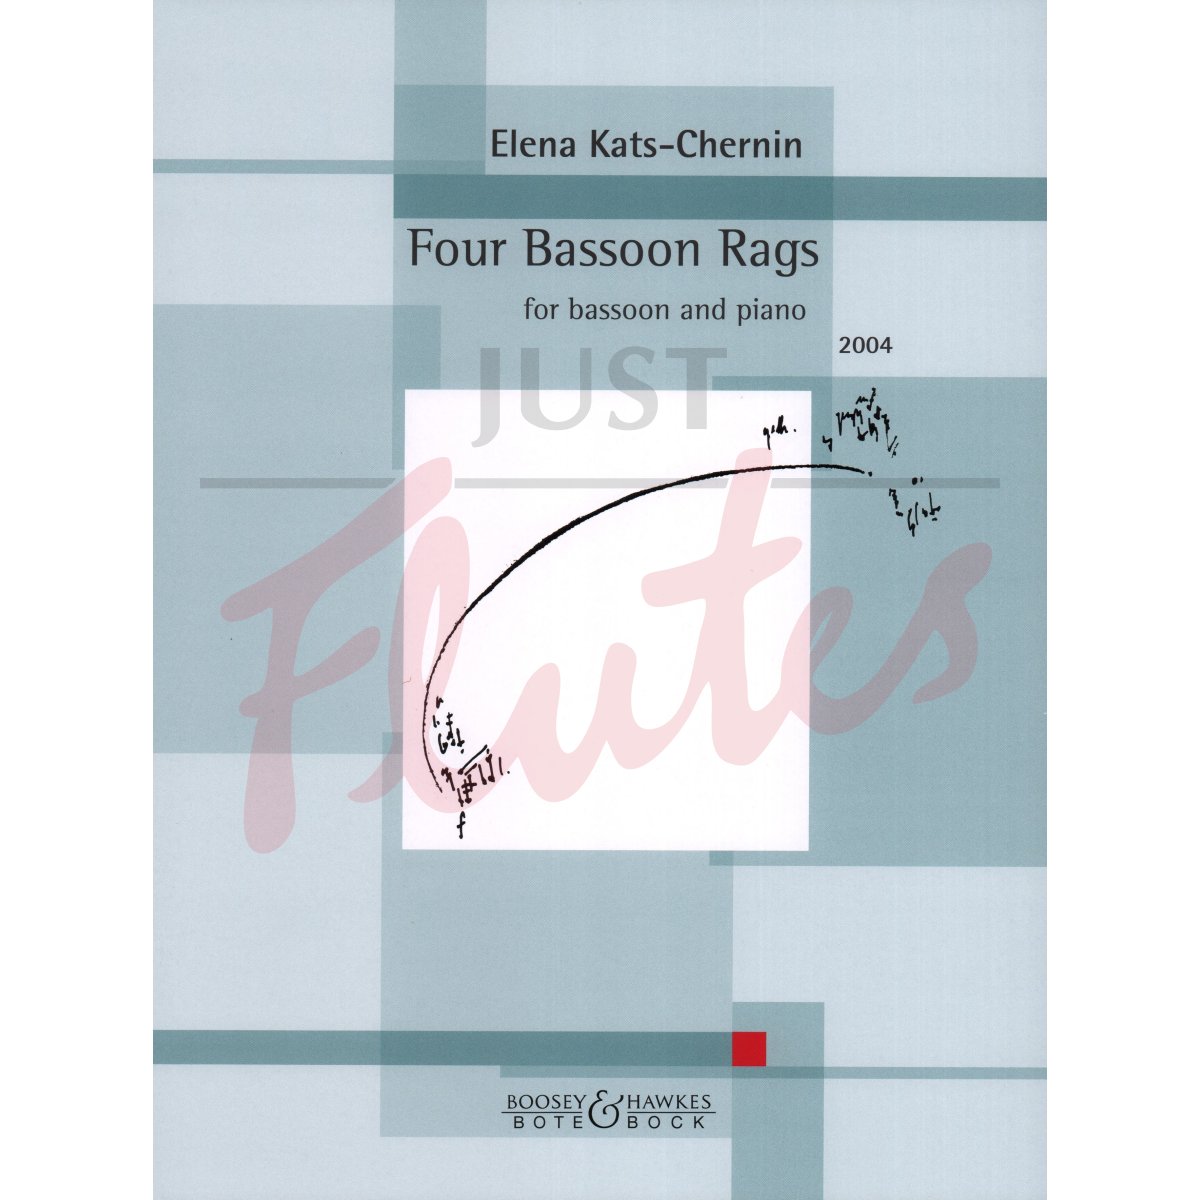 Four Bassoon Rags for Bassoon and Piano